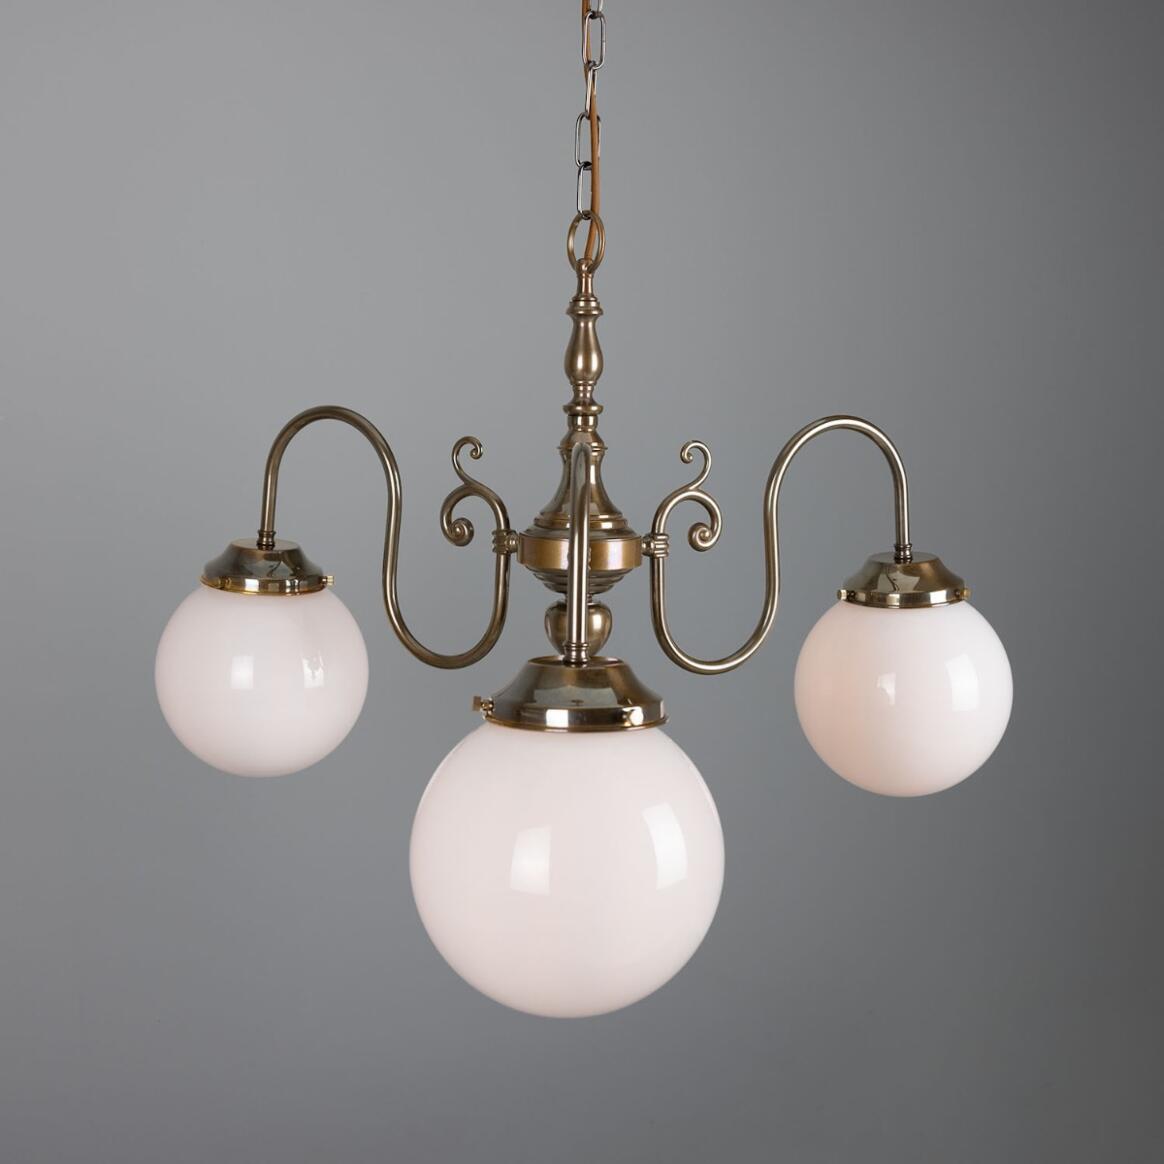 Eldron Traditional Chandelier with Opal Globes, Three-Arm main product image